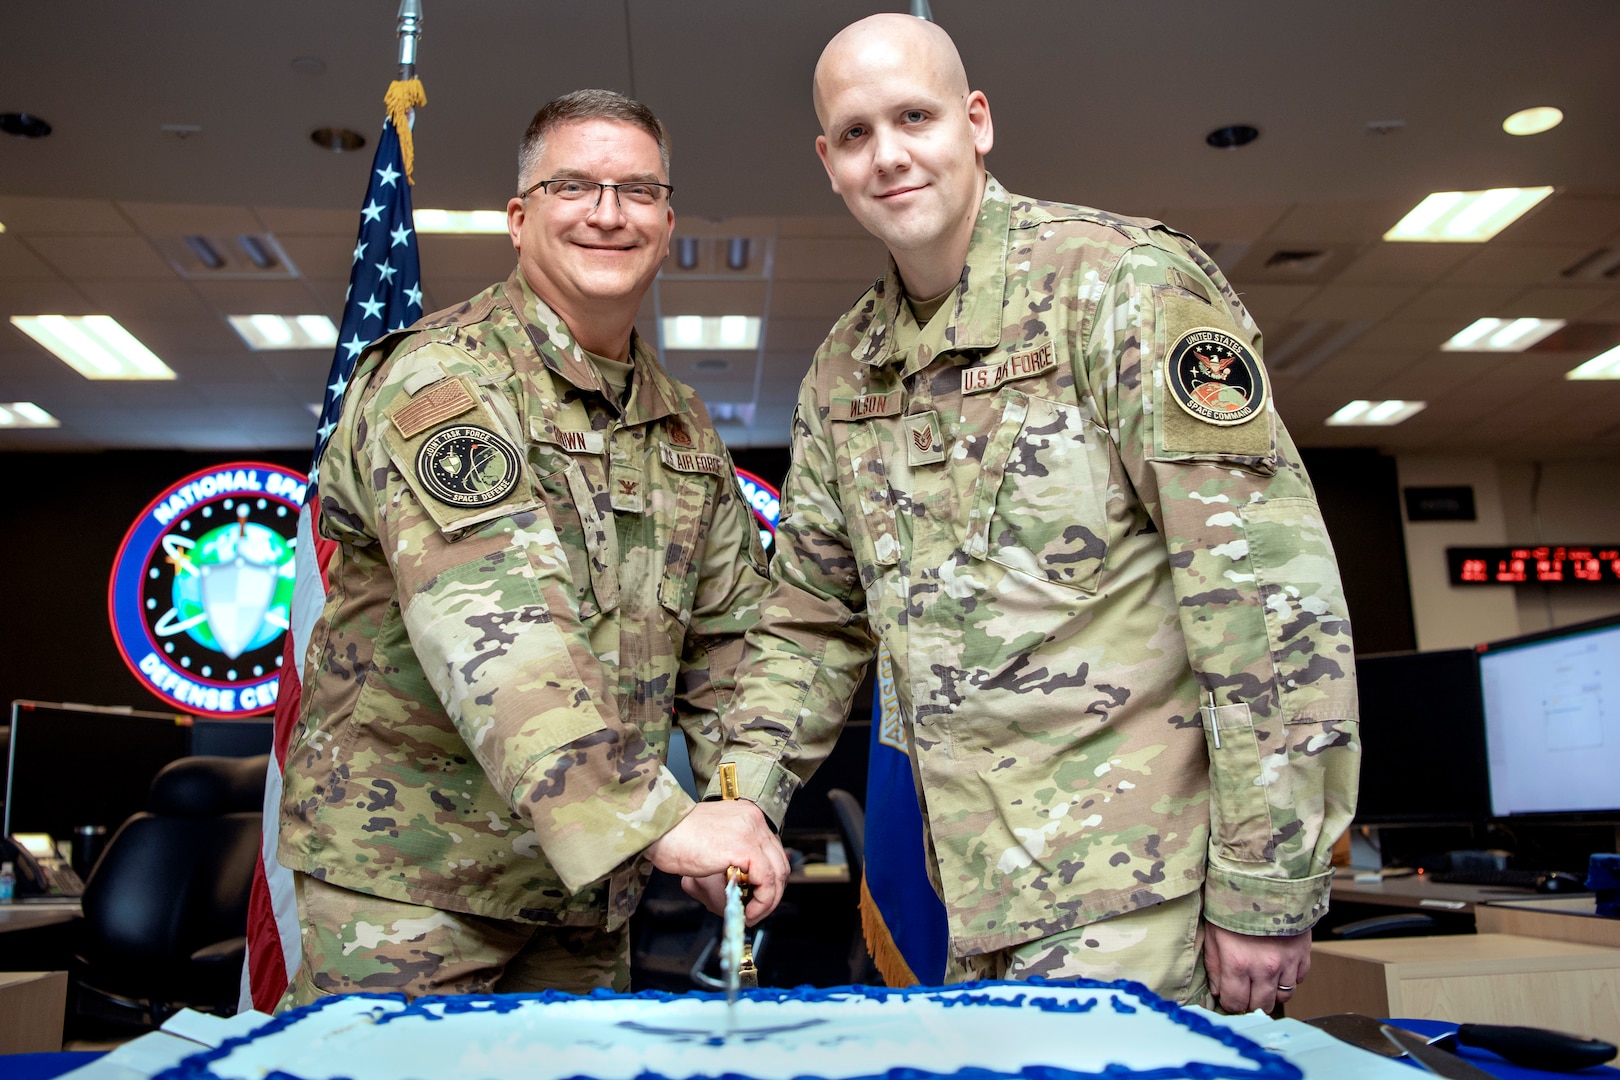 Two men in military uniforms cutting a birthday cake